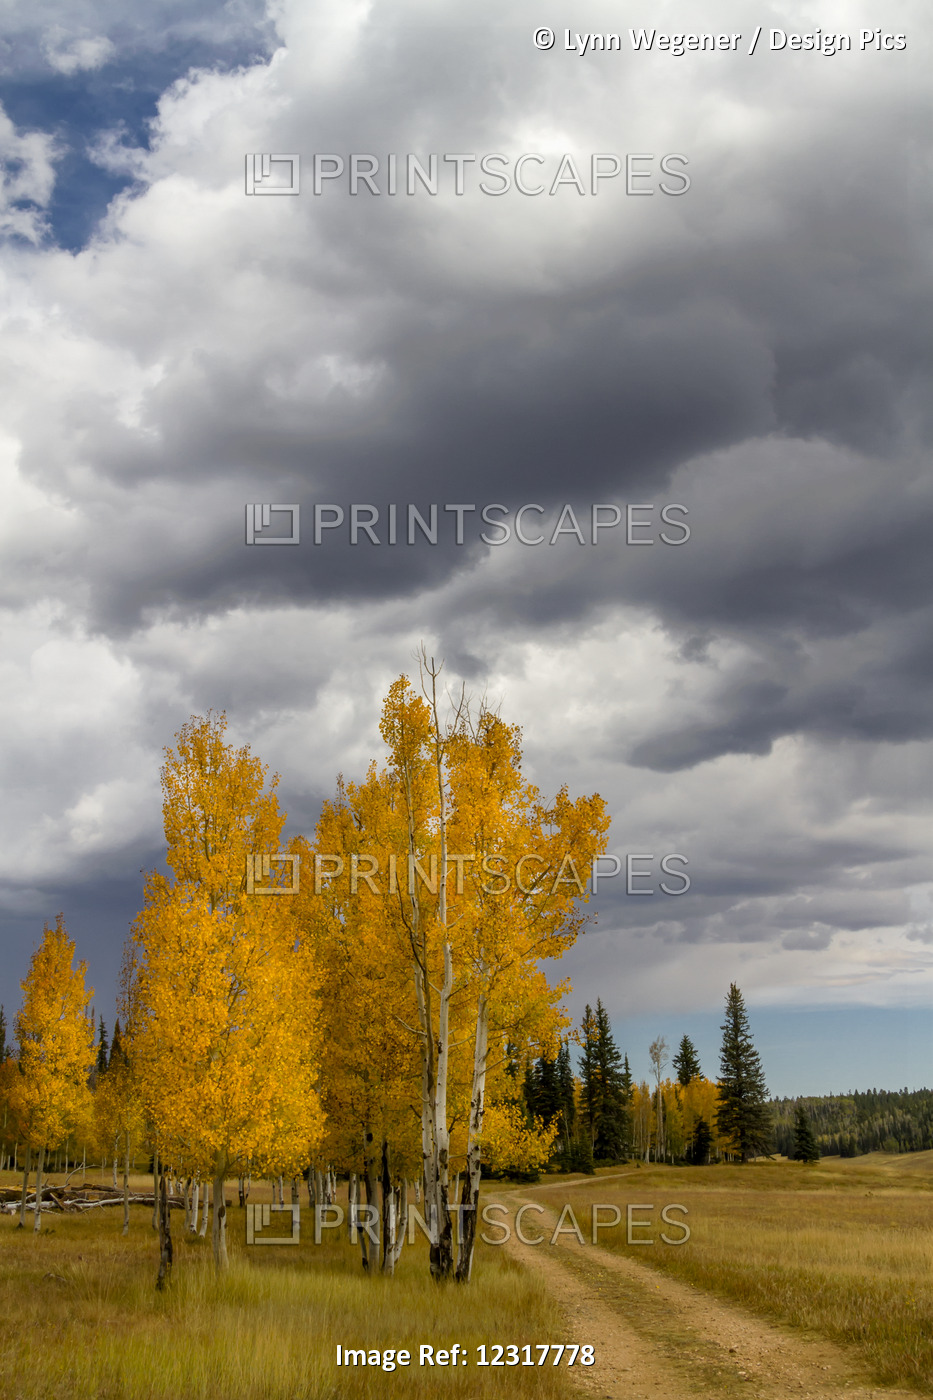 View Of An Approaching Storm On A Country Road With Fall Aspen Trees, North Rim ...